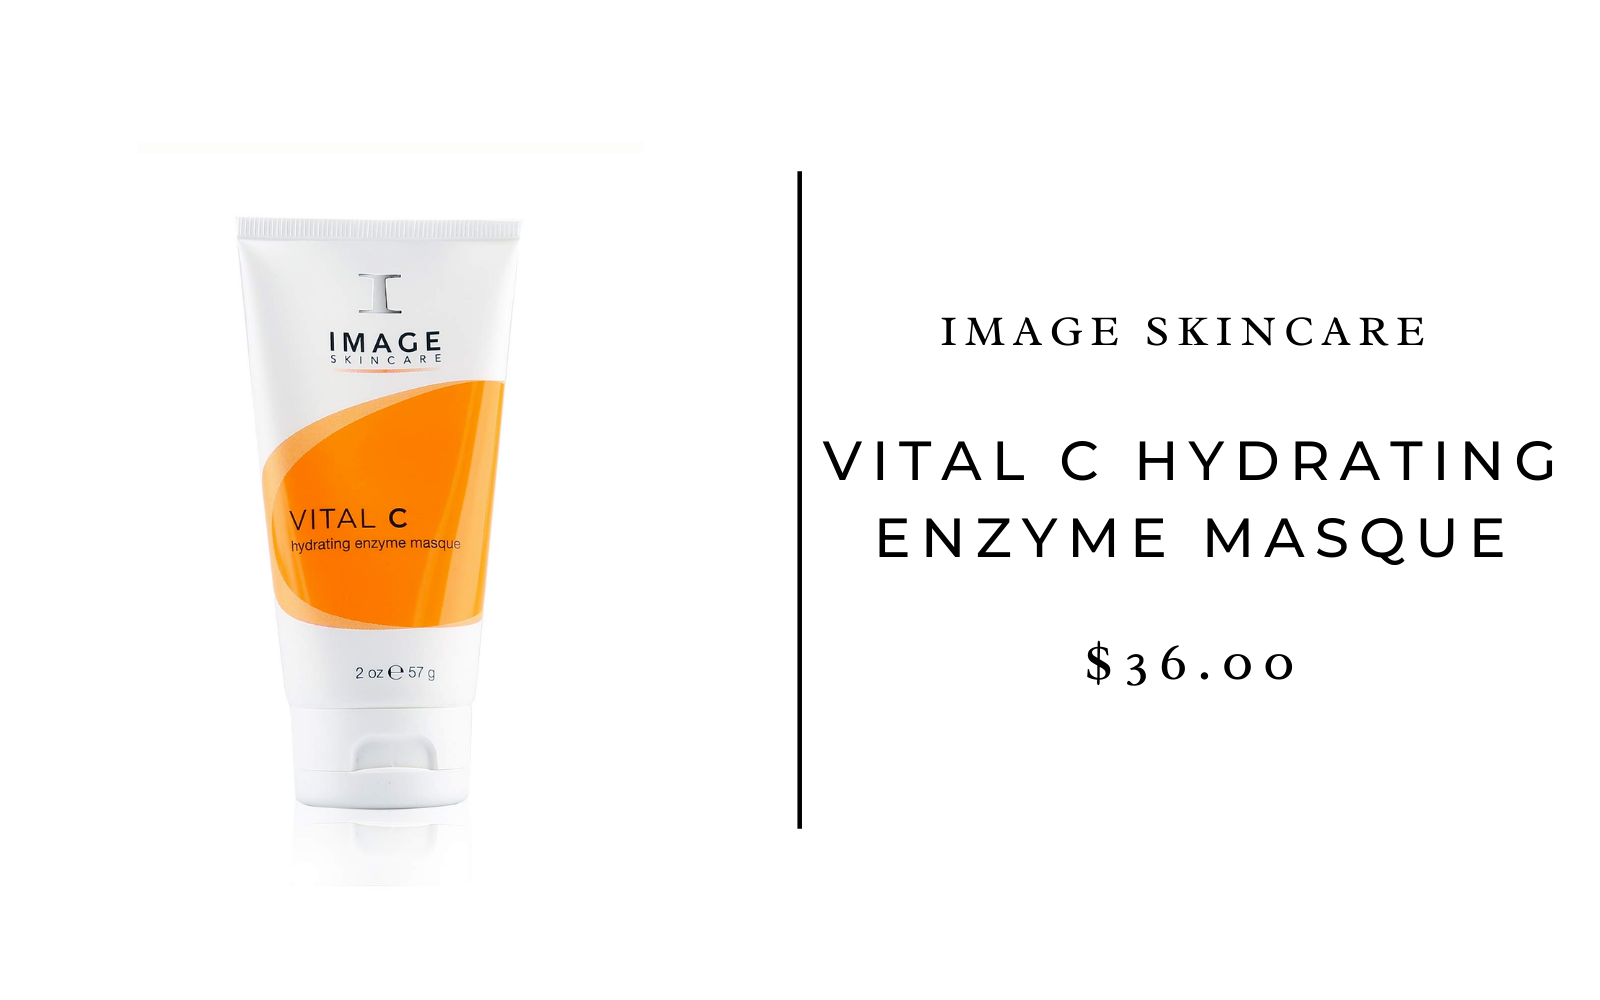 Image Vital C Hydrating Enzyme Masque